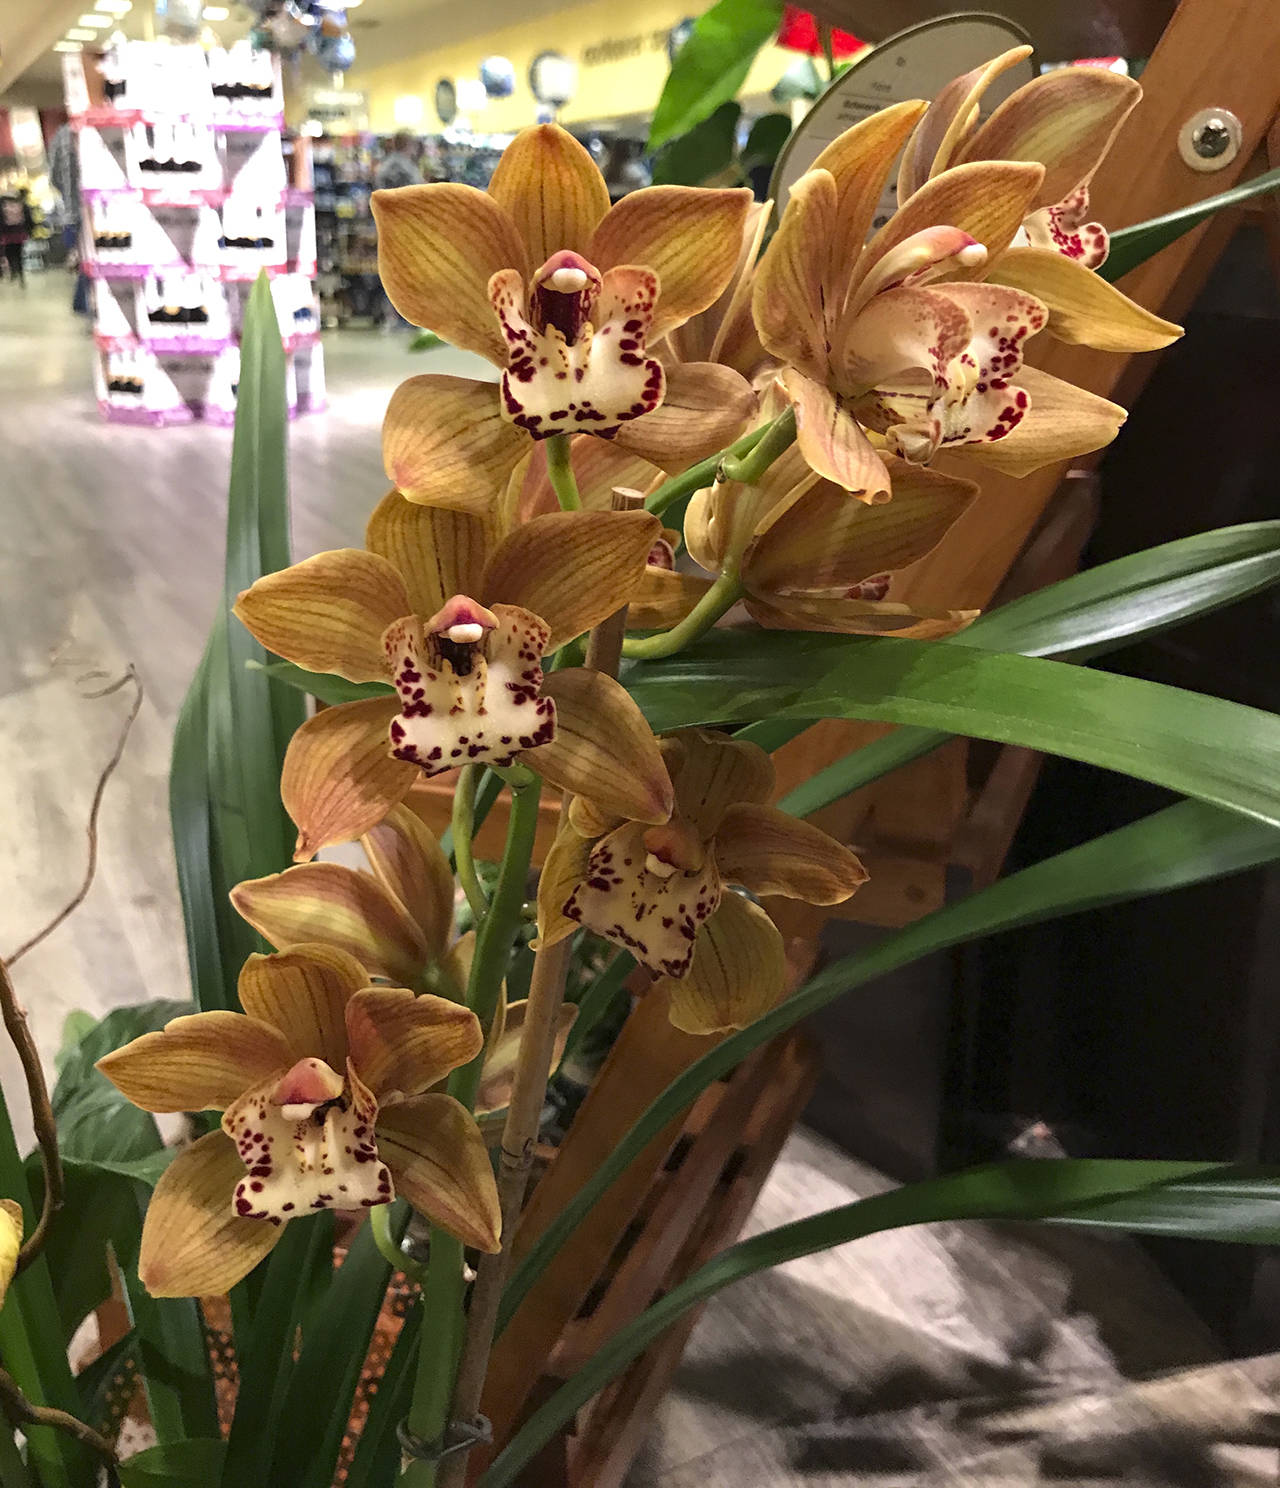 (Dauna Koval) Cymbidium is the most common flower used in orchid corsages. These are cooler and dryer growing.